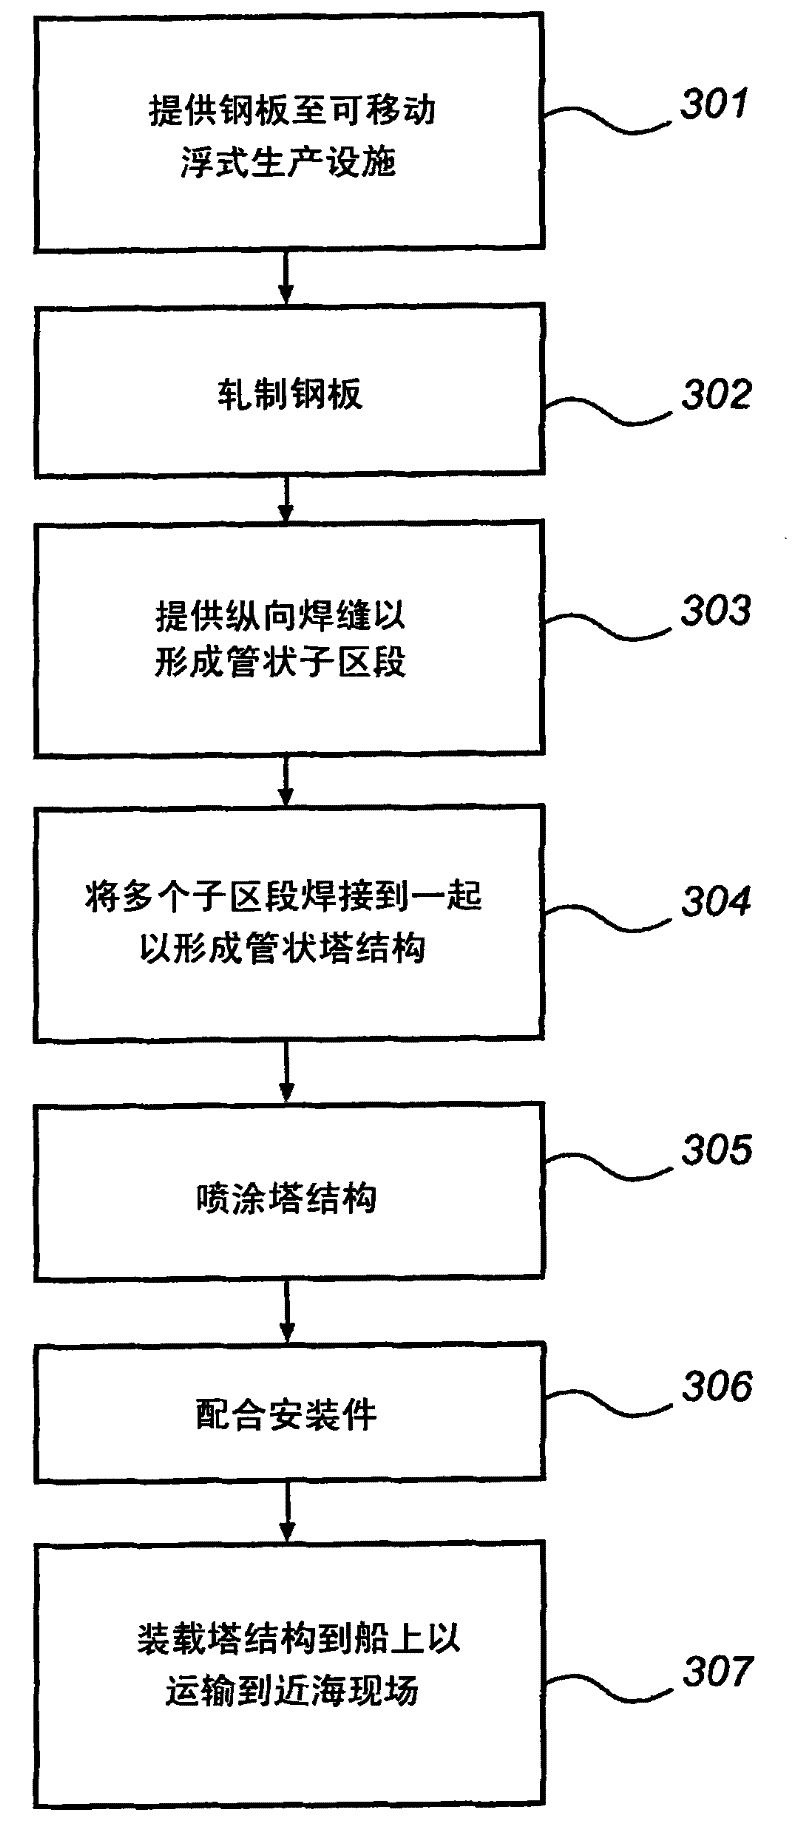 Method of manufacturing a wind turbine tower structure